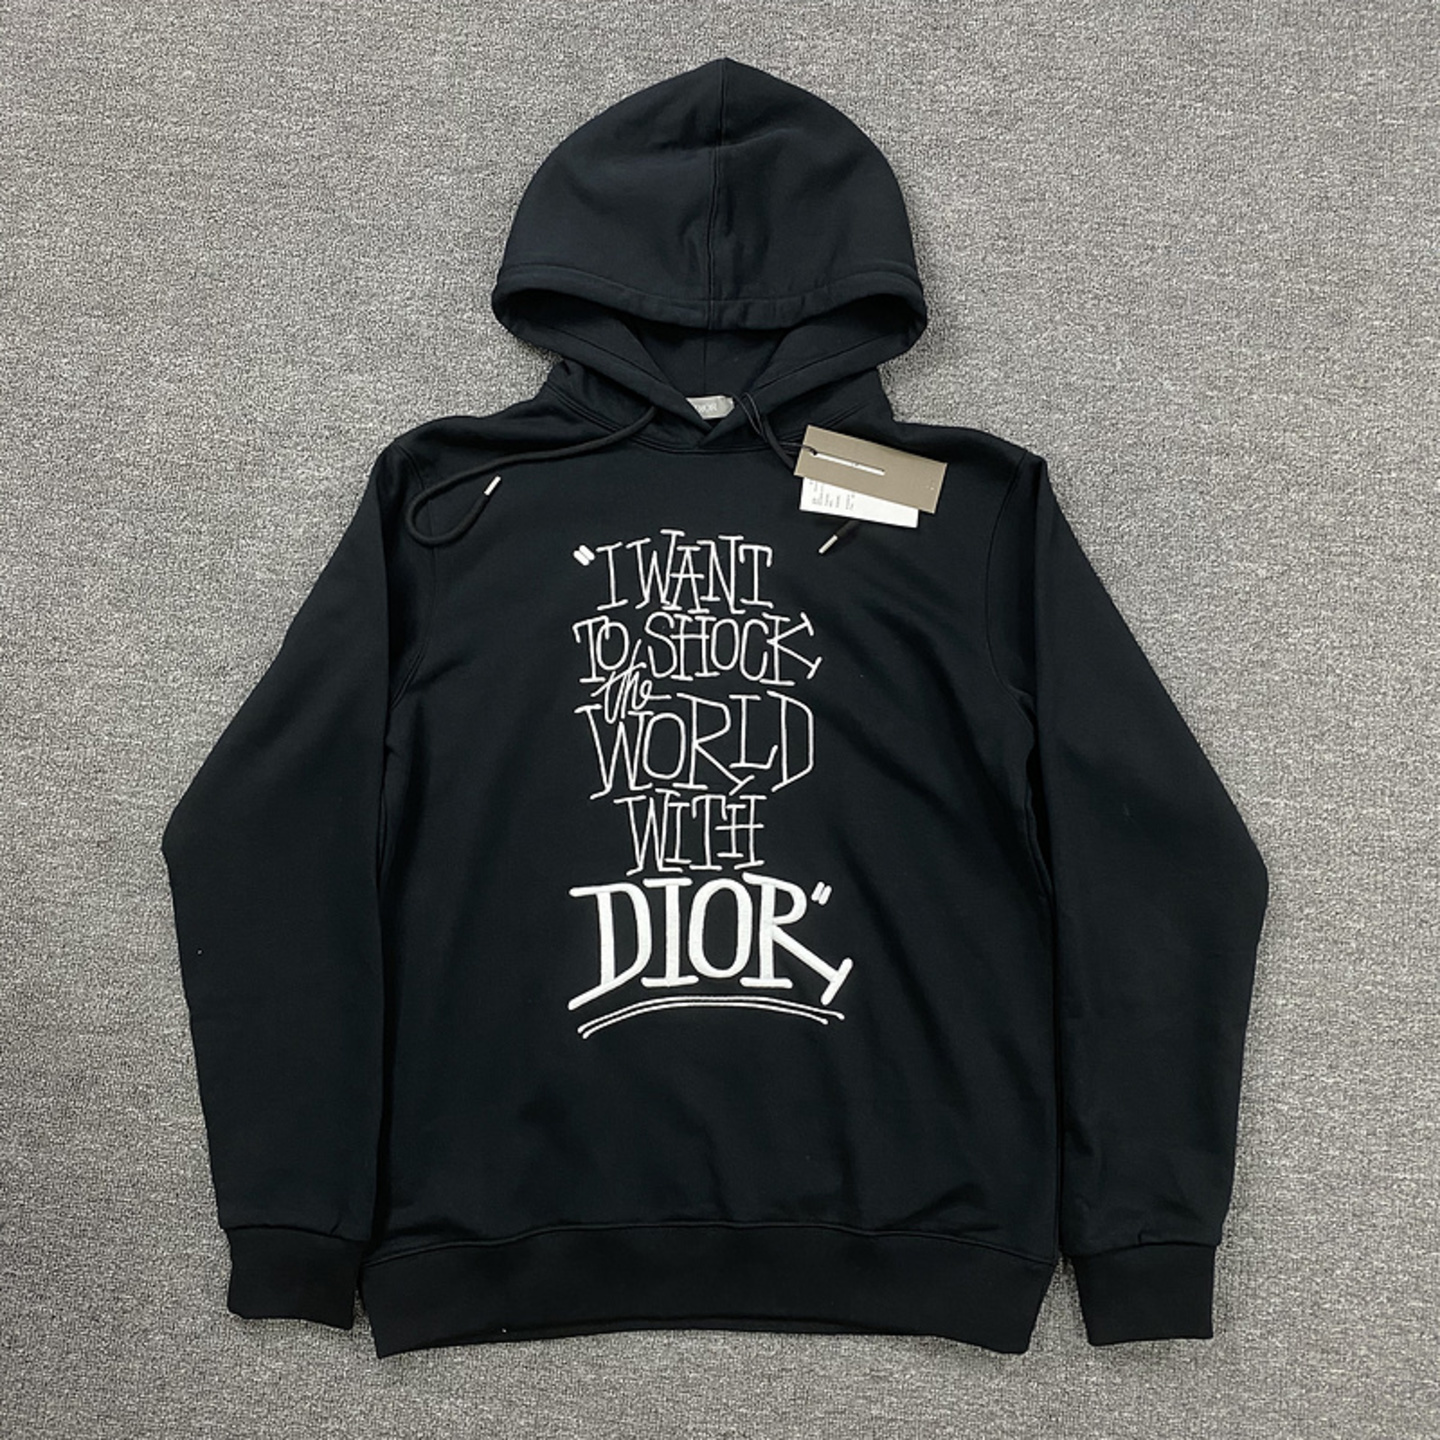 Dior and Shawn Oversized Hoodie